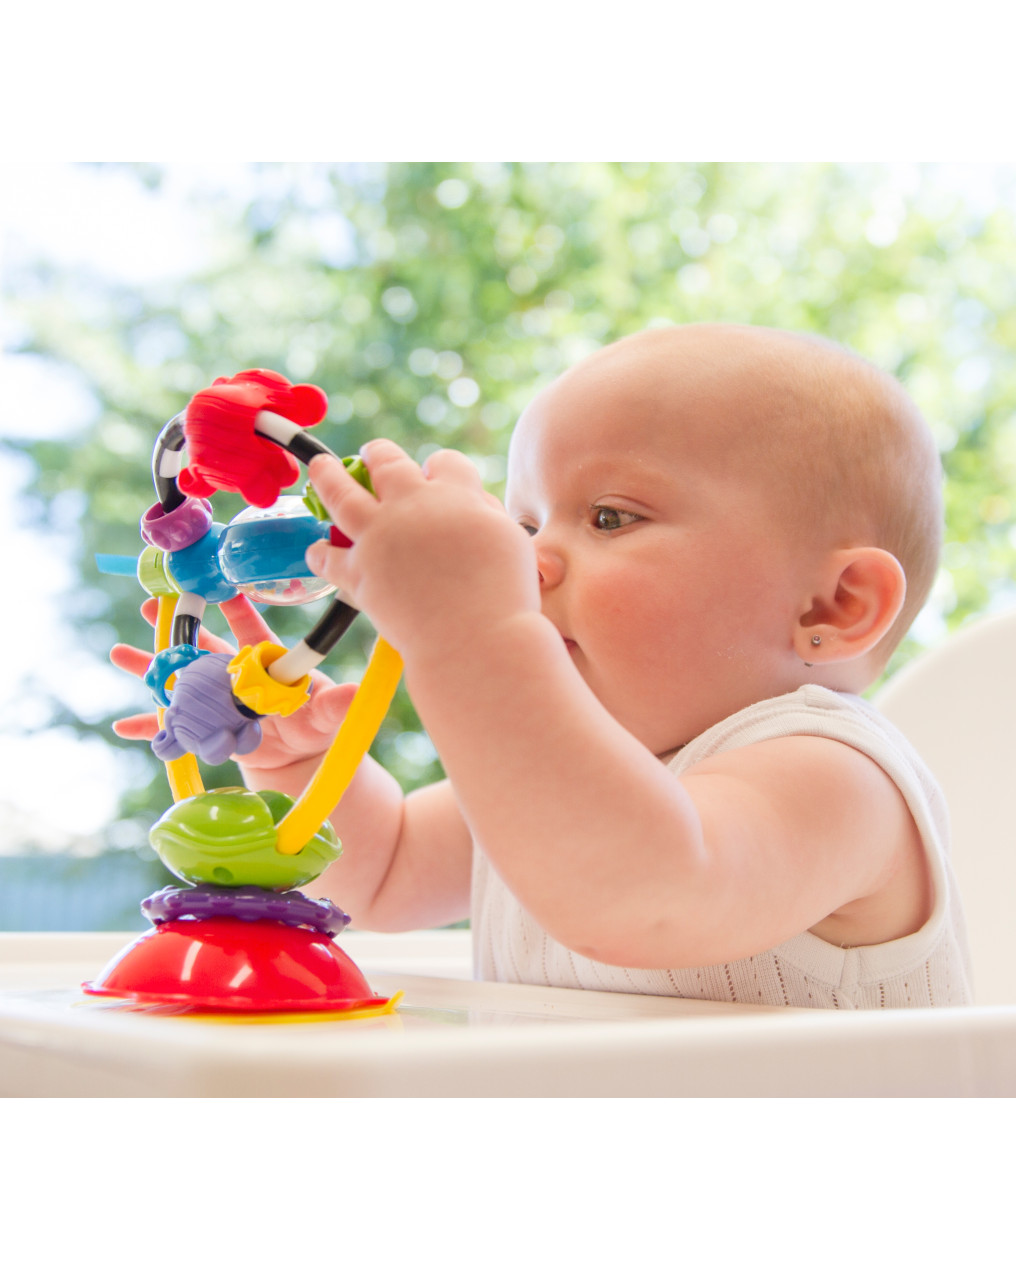 Playgro - high chair spinning toy - Playgro